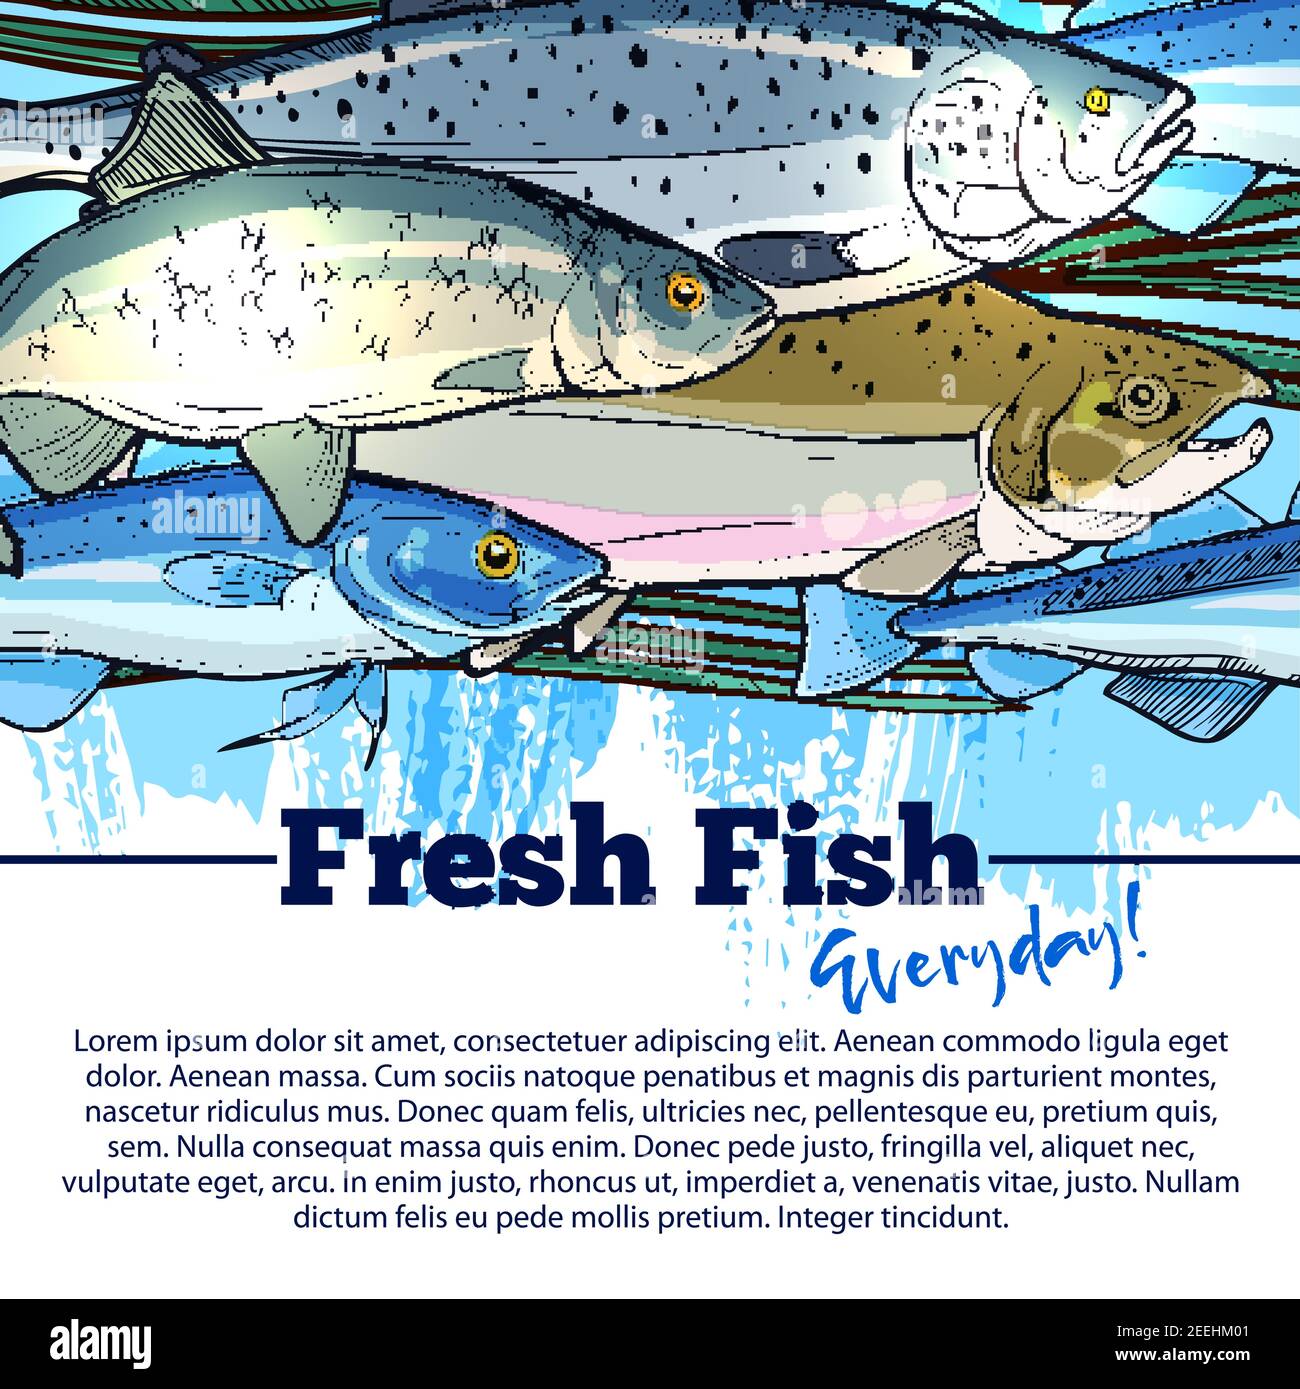 https://c8.alamy.com/comp/2EEHM01/fresh-fish-market-poster-for-seafood-shop-or-fishing-store-vector-design-of-fisher-big-catch-of-sea-food-and-fishes-tuna-mackerel-or-marlin-and-sea-2EEHM01.jpg